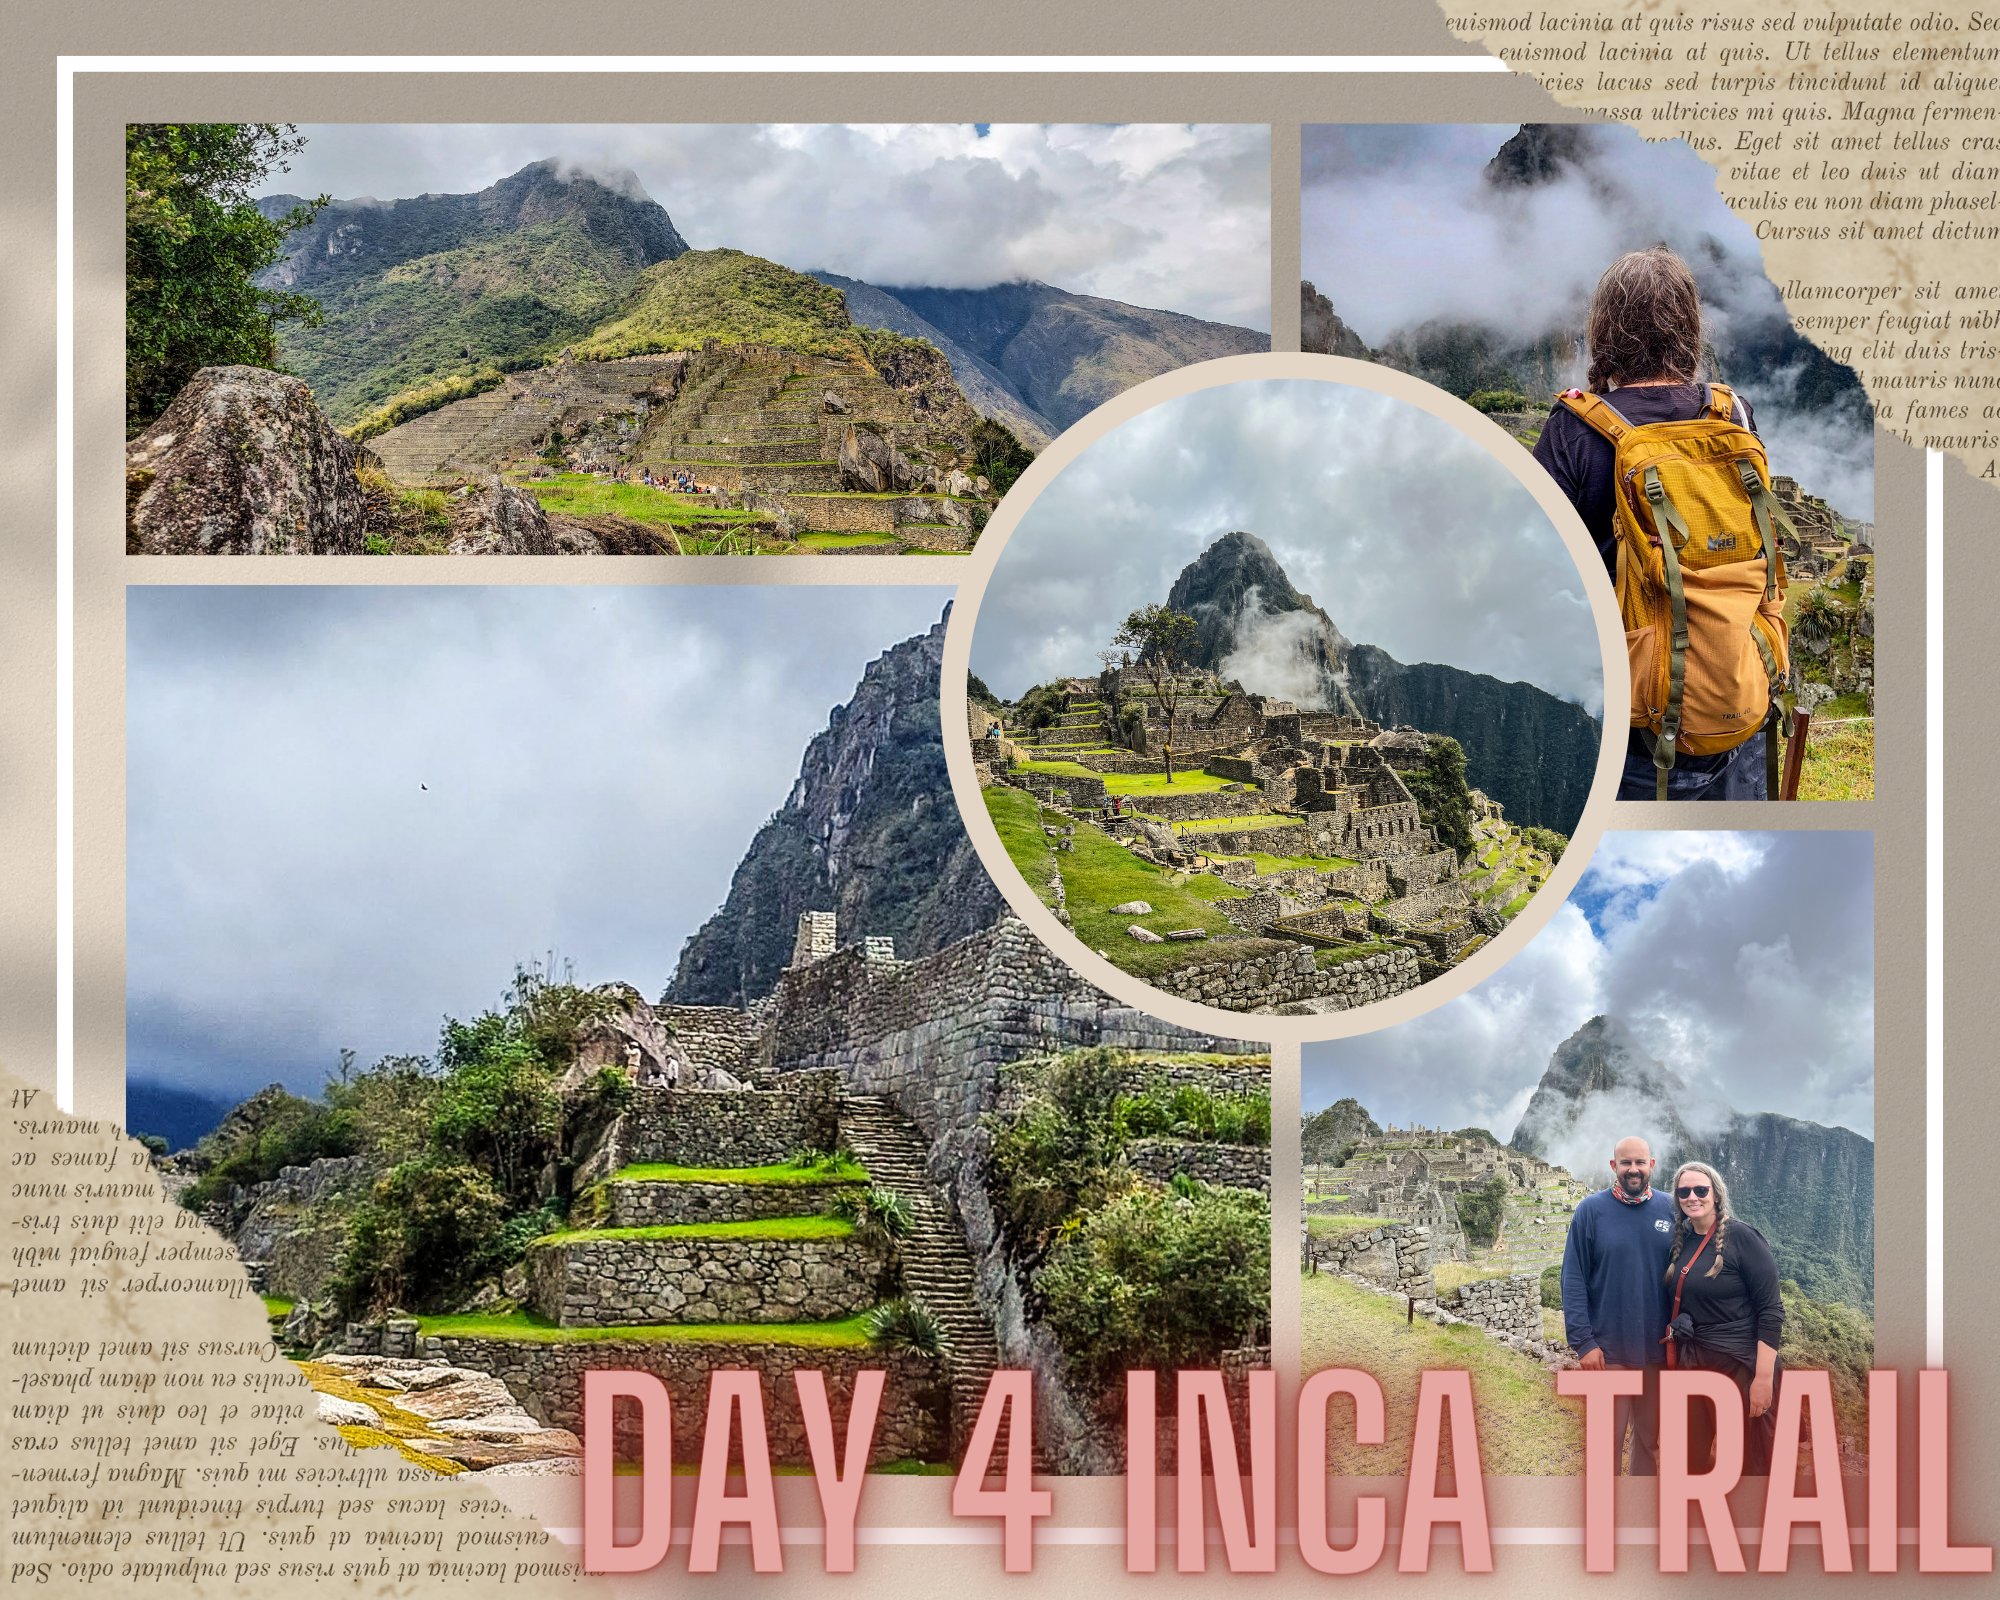 Day 4 of the Inca Trail: The Final Sojourn to Machu Picchu